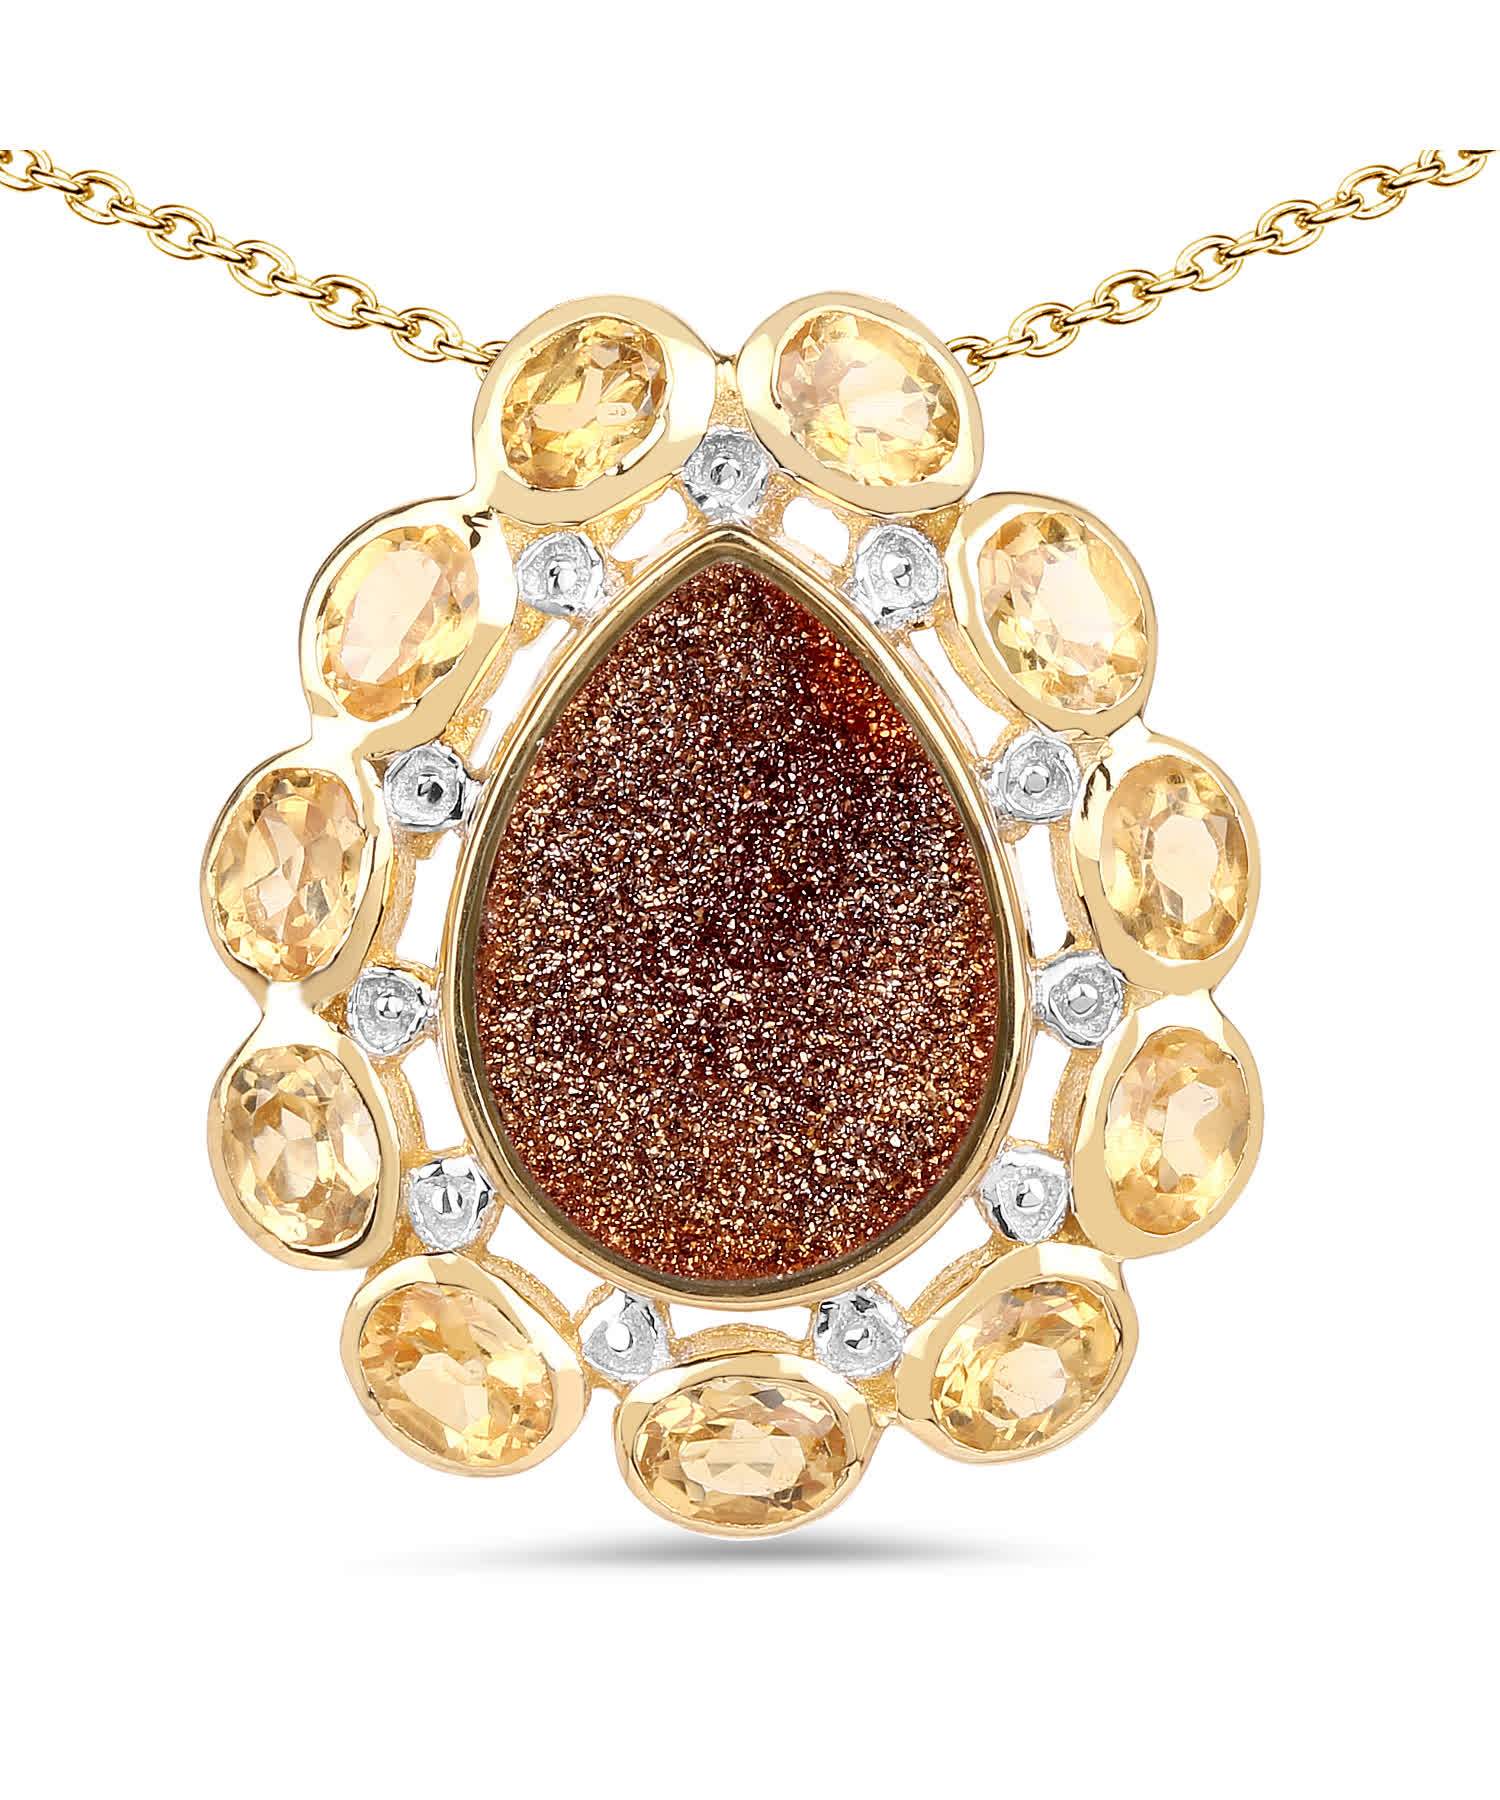 5.14ctw Natural Drusy Agate and Citrine 14k Gold Plated 925 Sterling Silver Pendant With Chain View 1